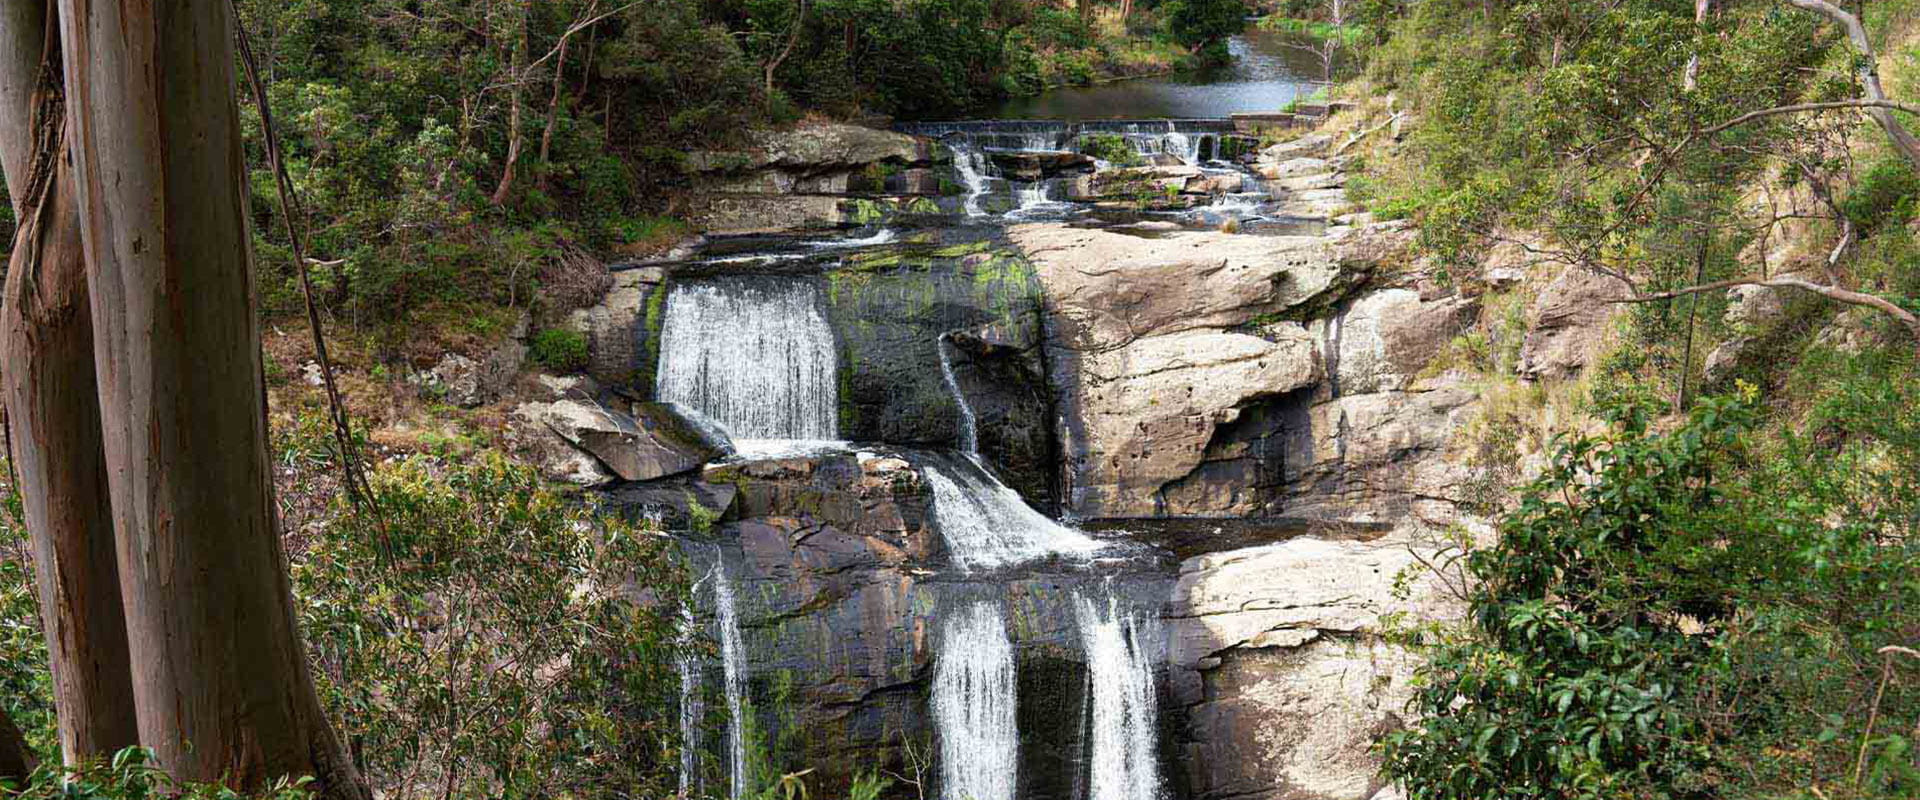 A three tiered waterfall in full flow set amongst a rugged bushlands